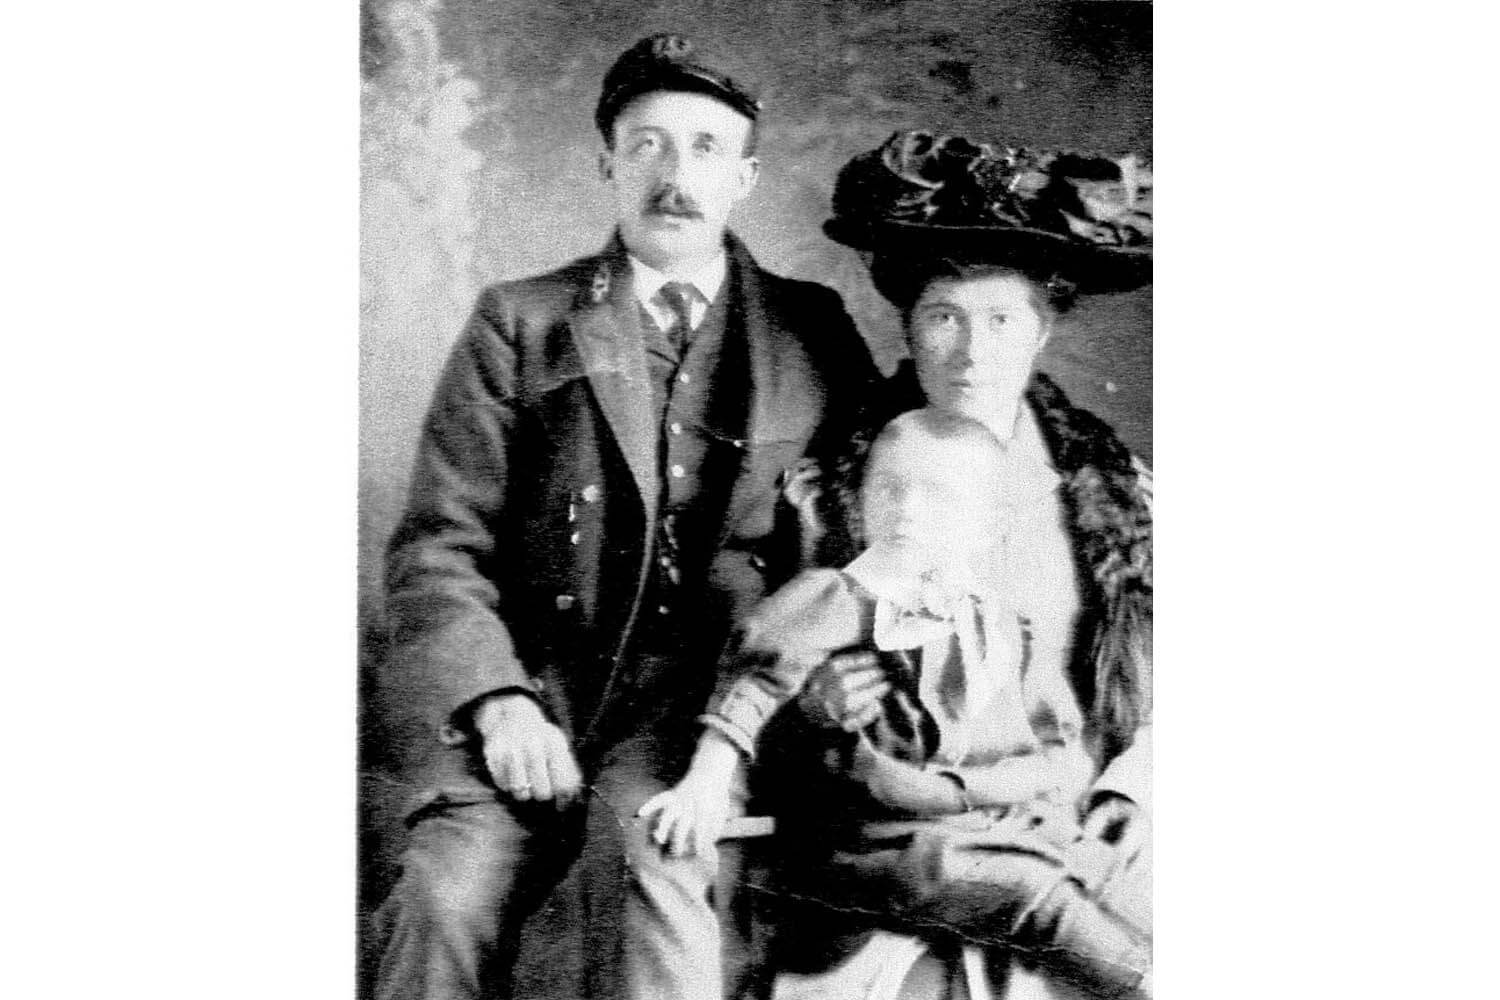 A man and woman sitting next to each other.